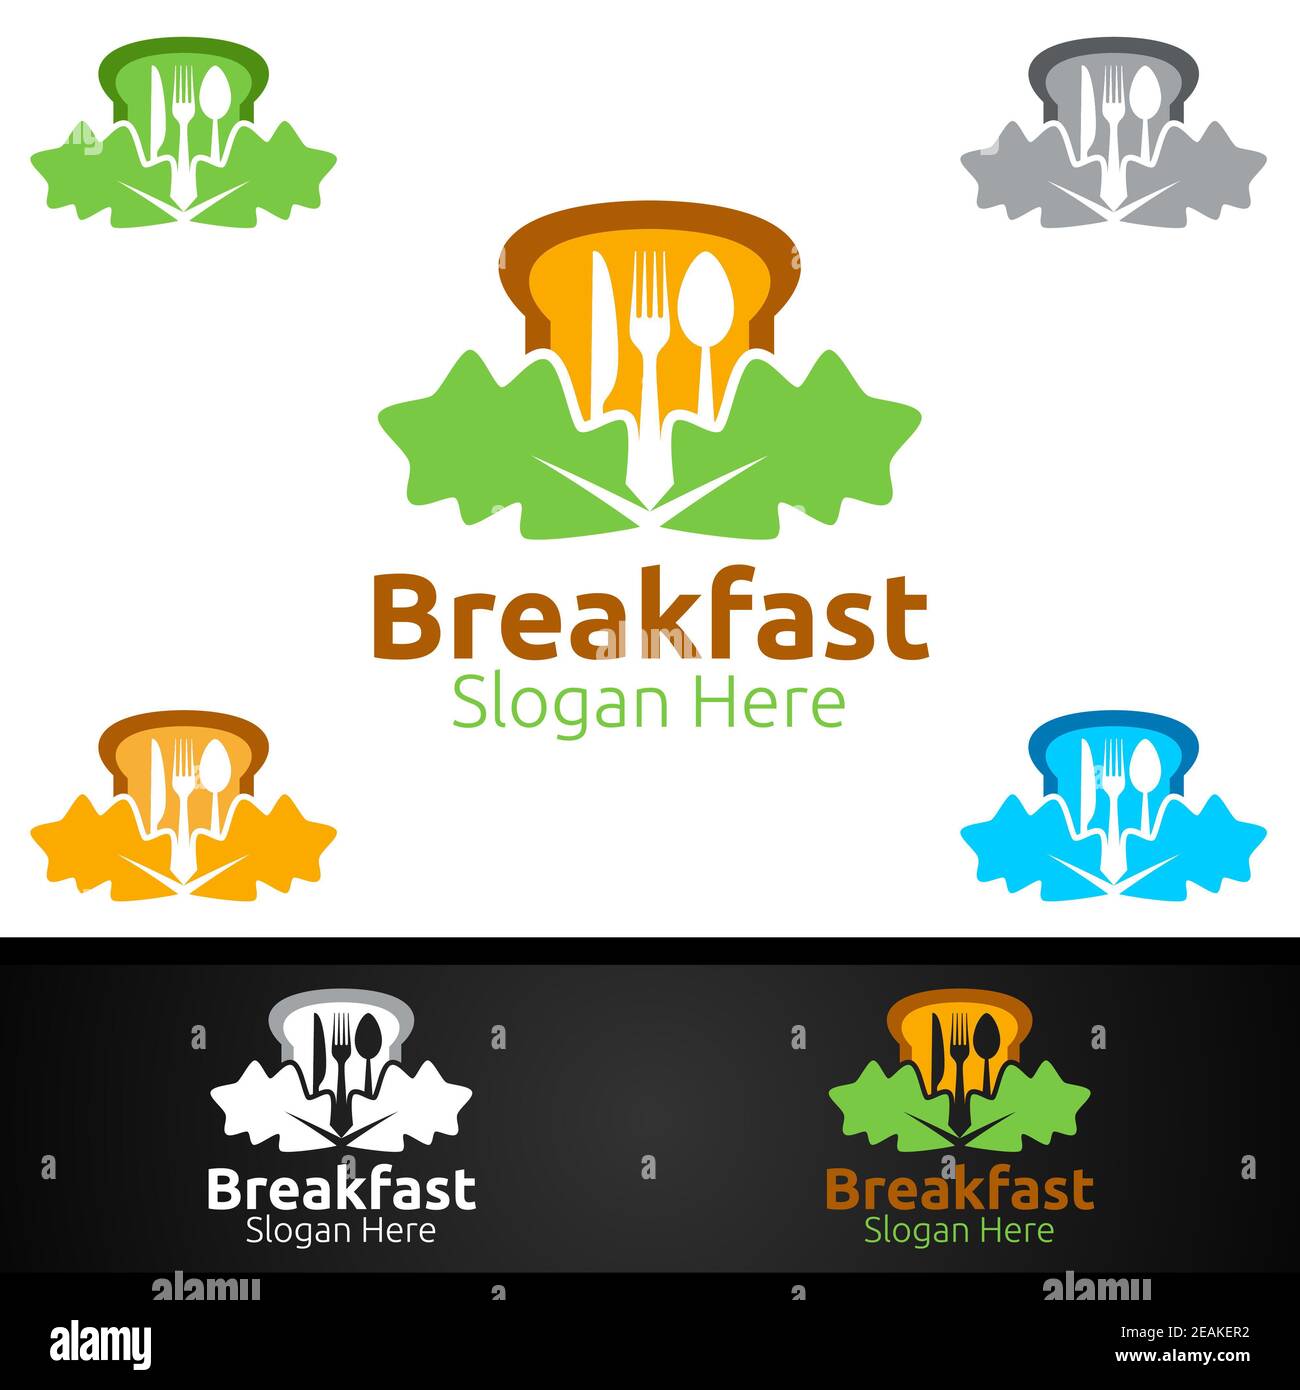 Fast Food Breakfast Delivery Service Logo for Restaurant, Cafe or Online Catering Delivery Stock Photo